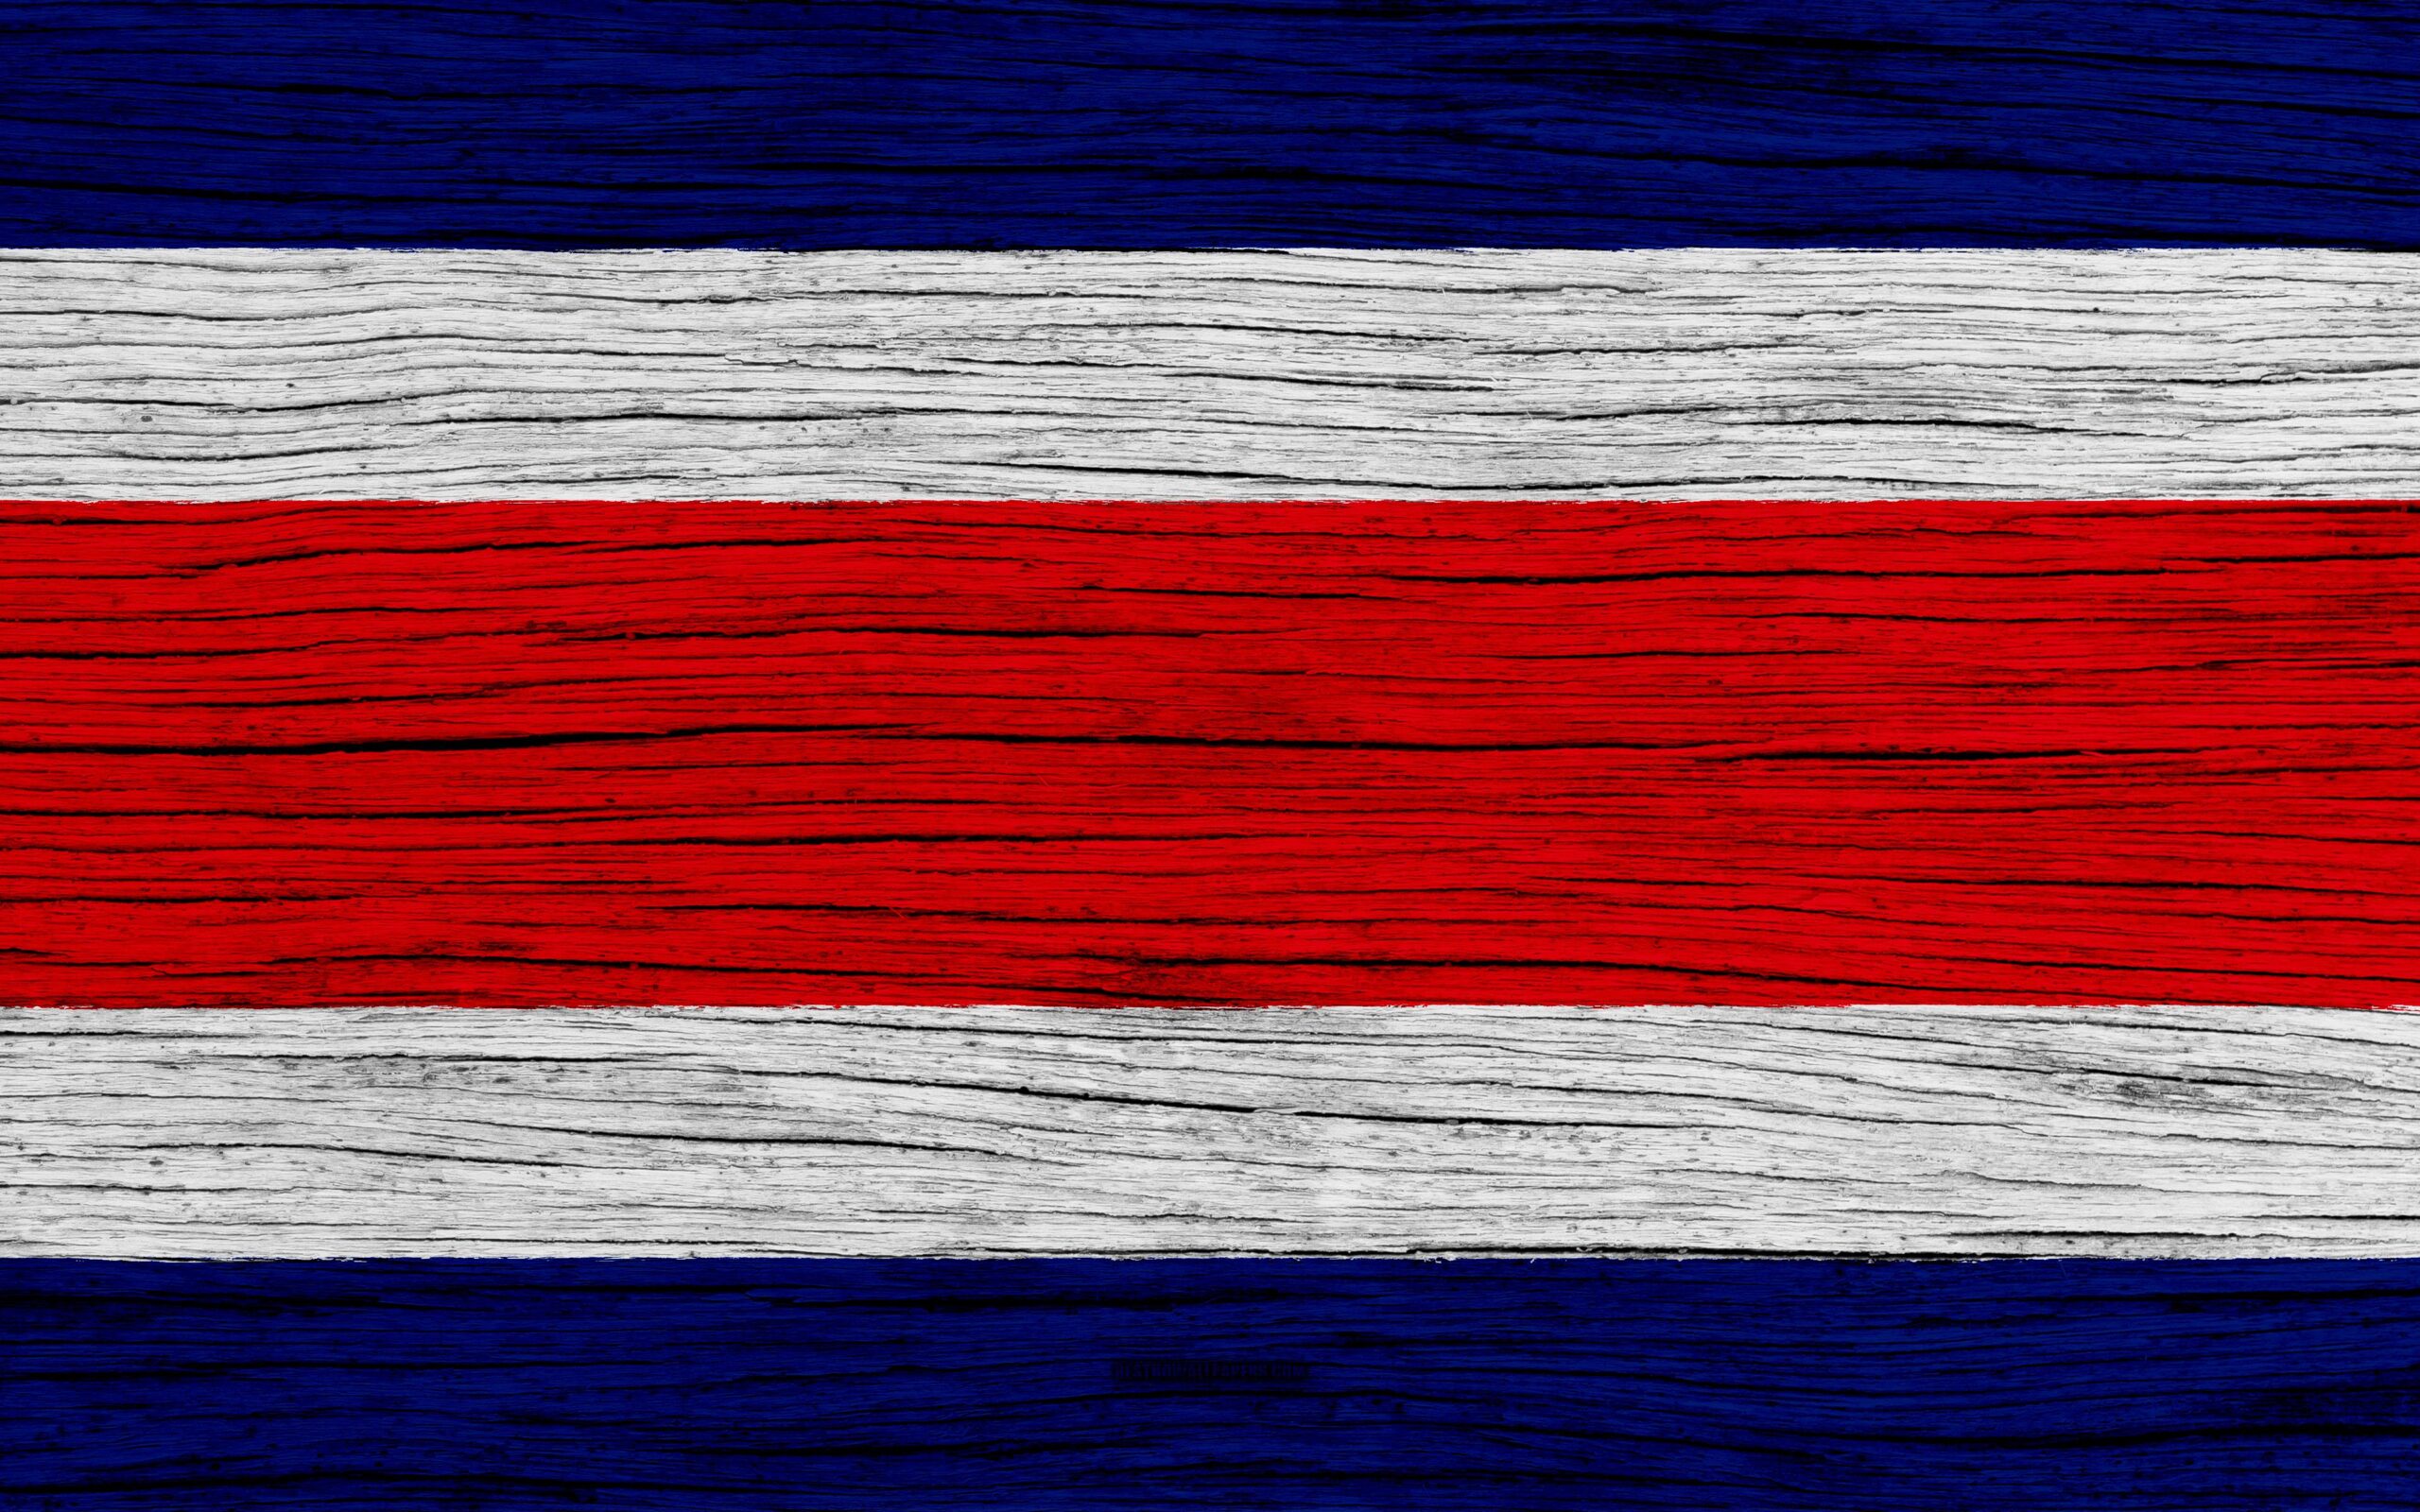 Download wallpapers Flag of Costa Rica, 4k, North America, wooden